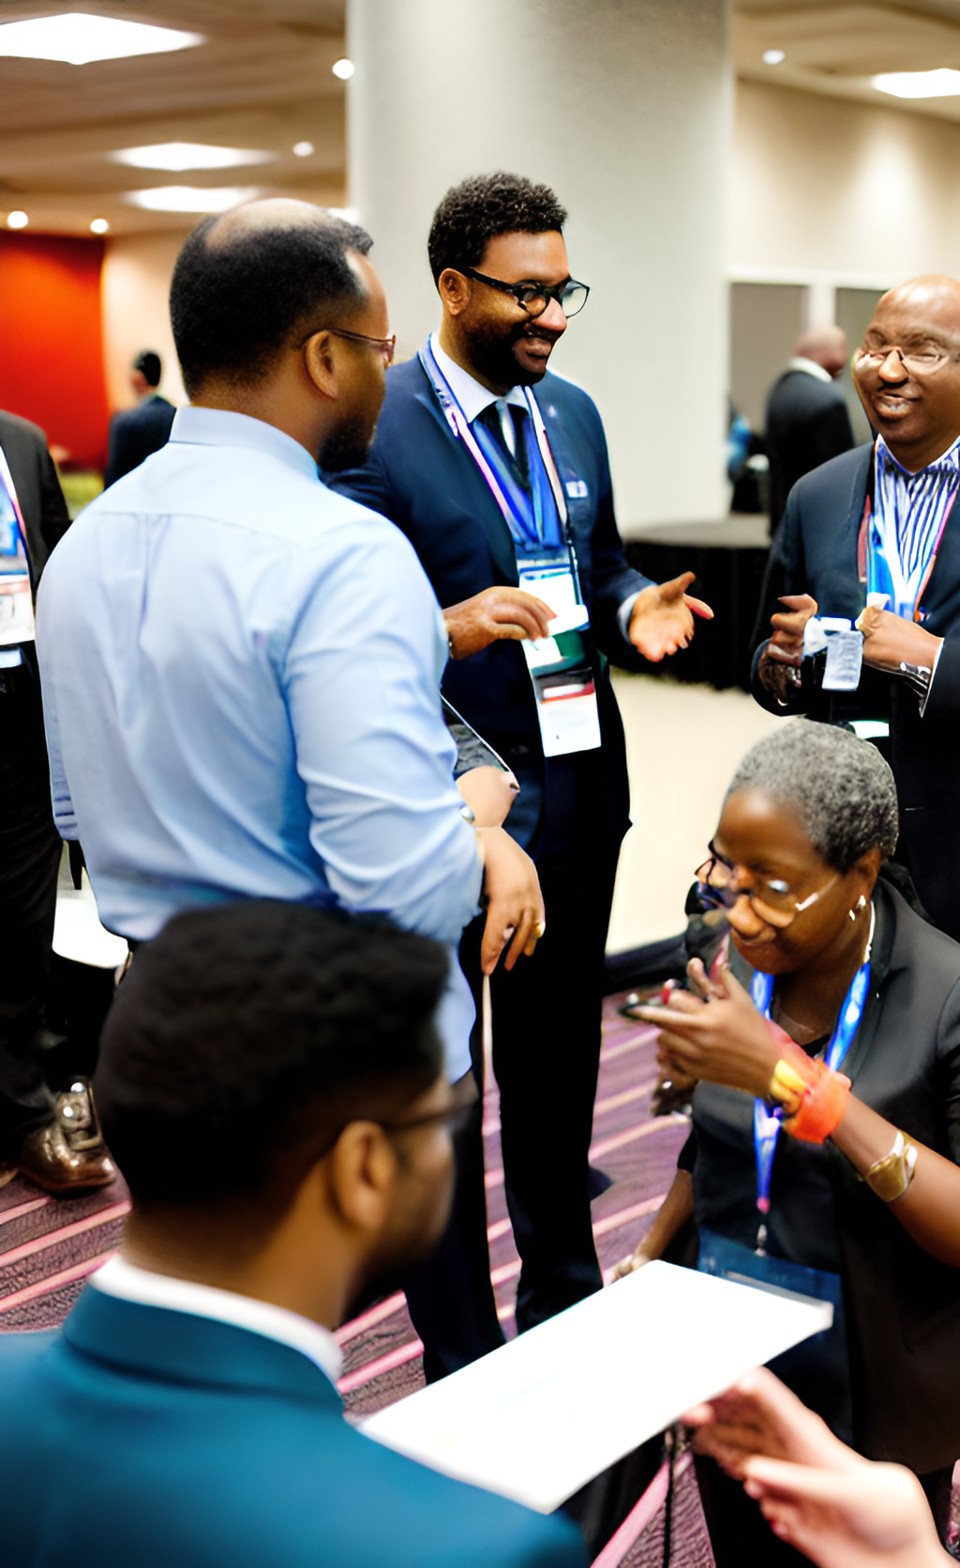 A diverse group of conference attendees engaged in discussions and networking, showcasing the inclusive nature of the event